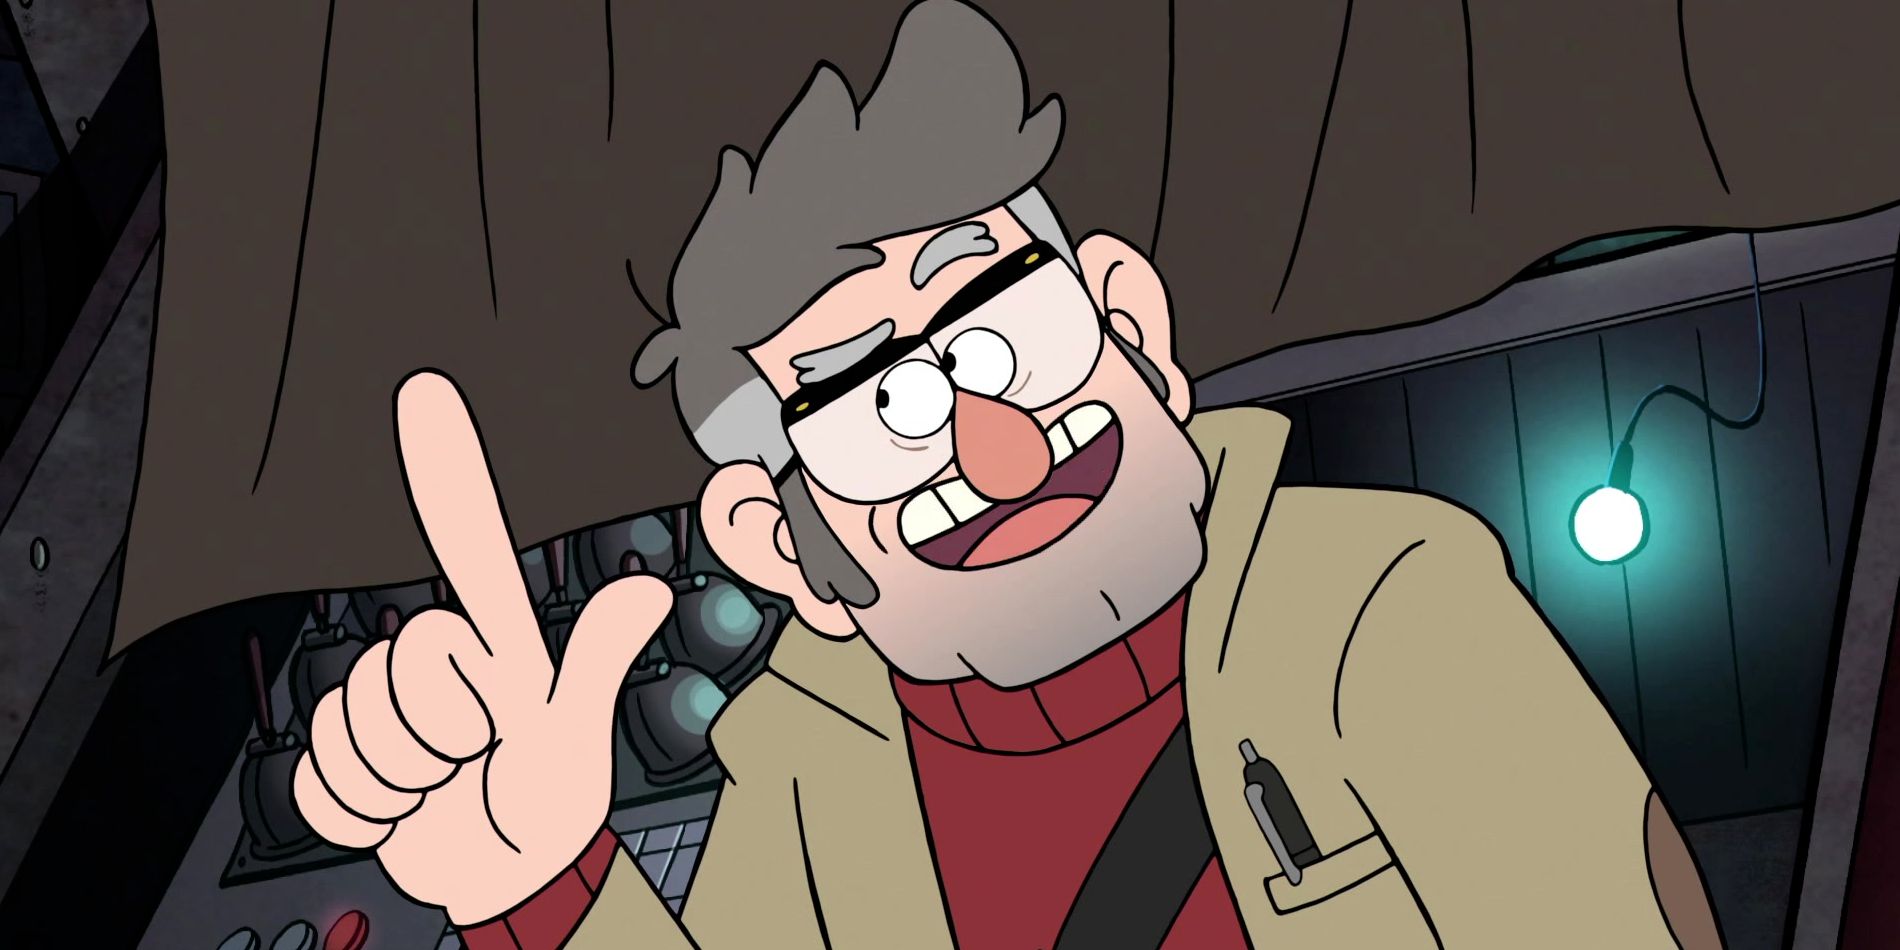 Grunkle Ford pointing in Gravity Falls